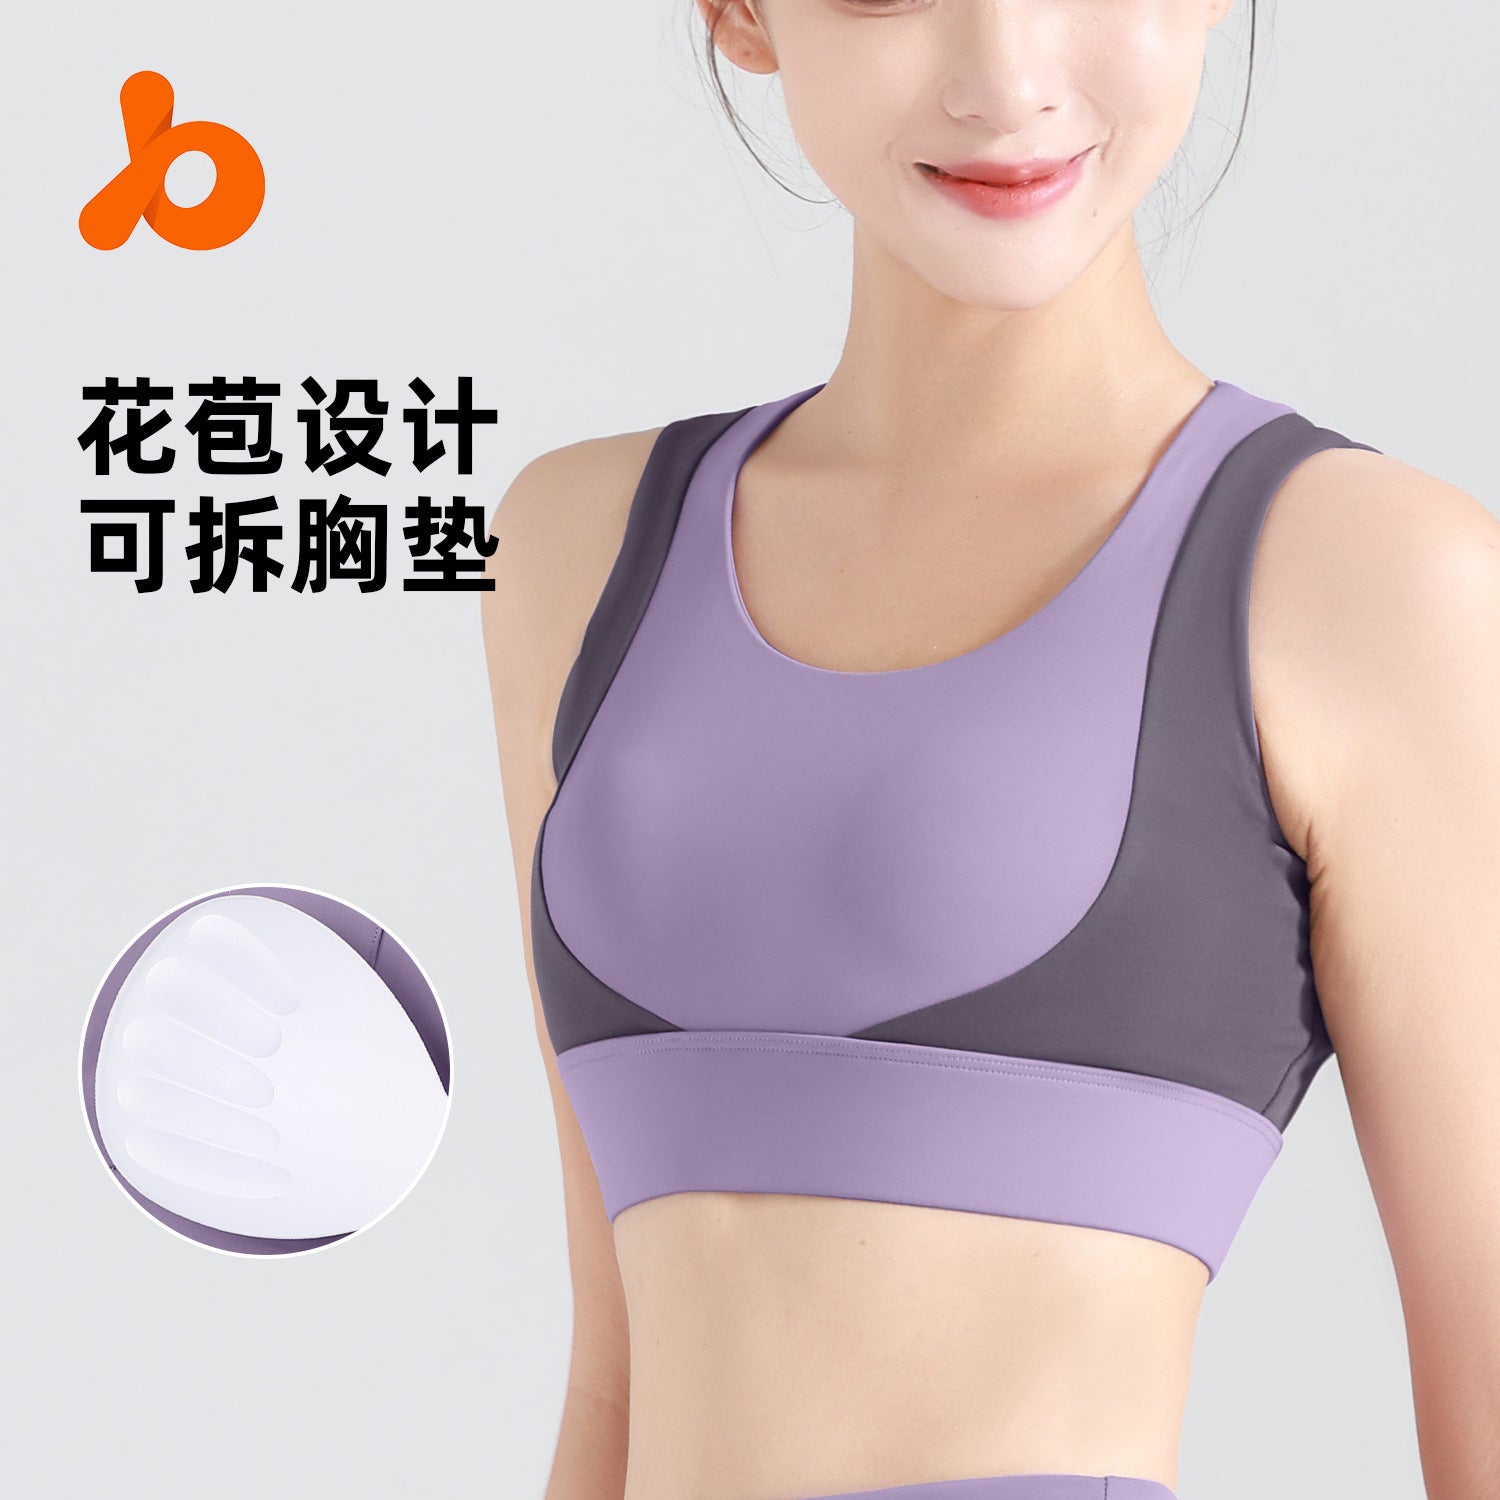 Juyitang color-block crop top short sleeve sports fitness top quick-drying free bra yoga tight short sleeve women